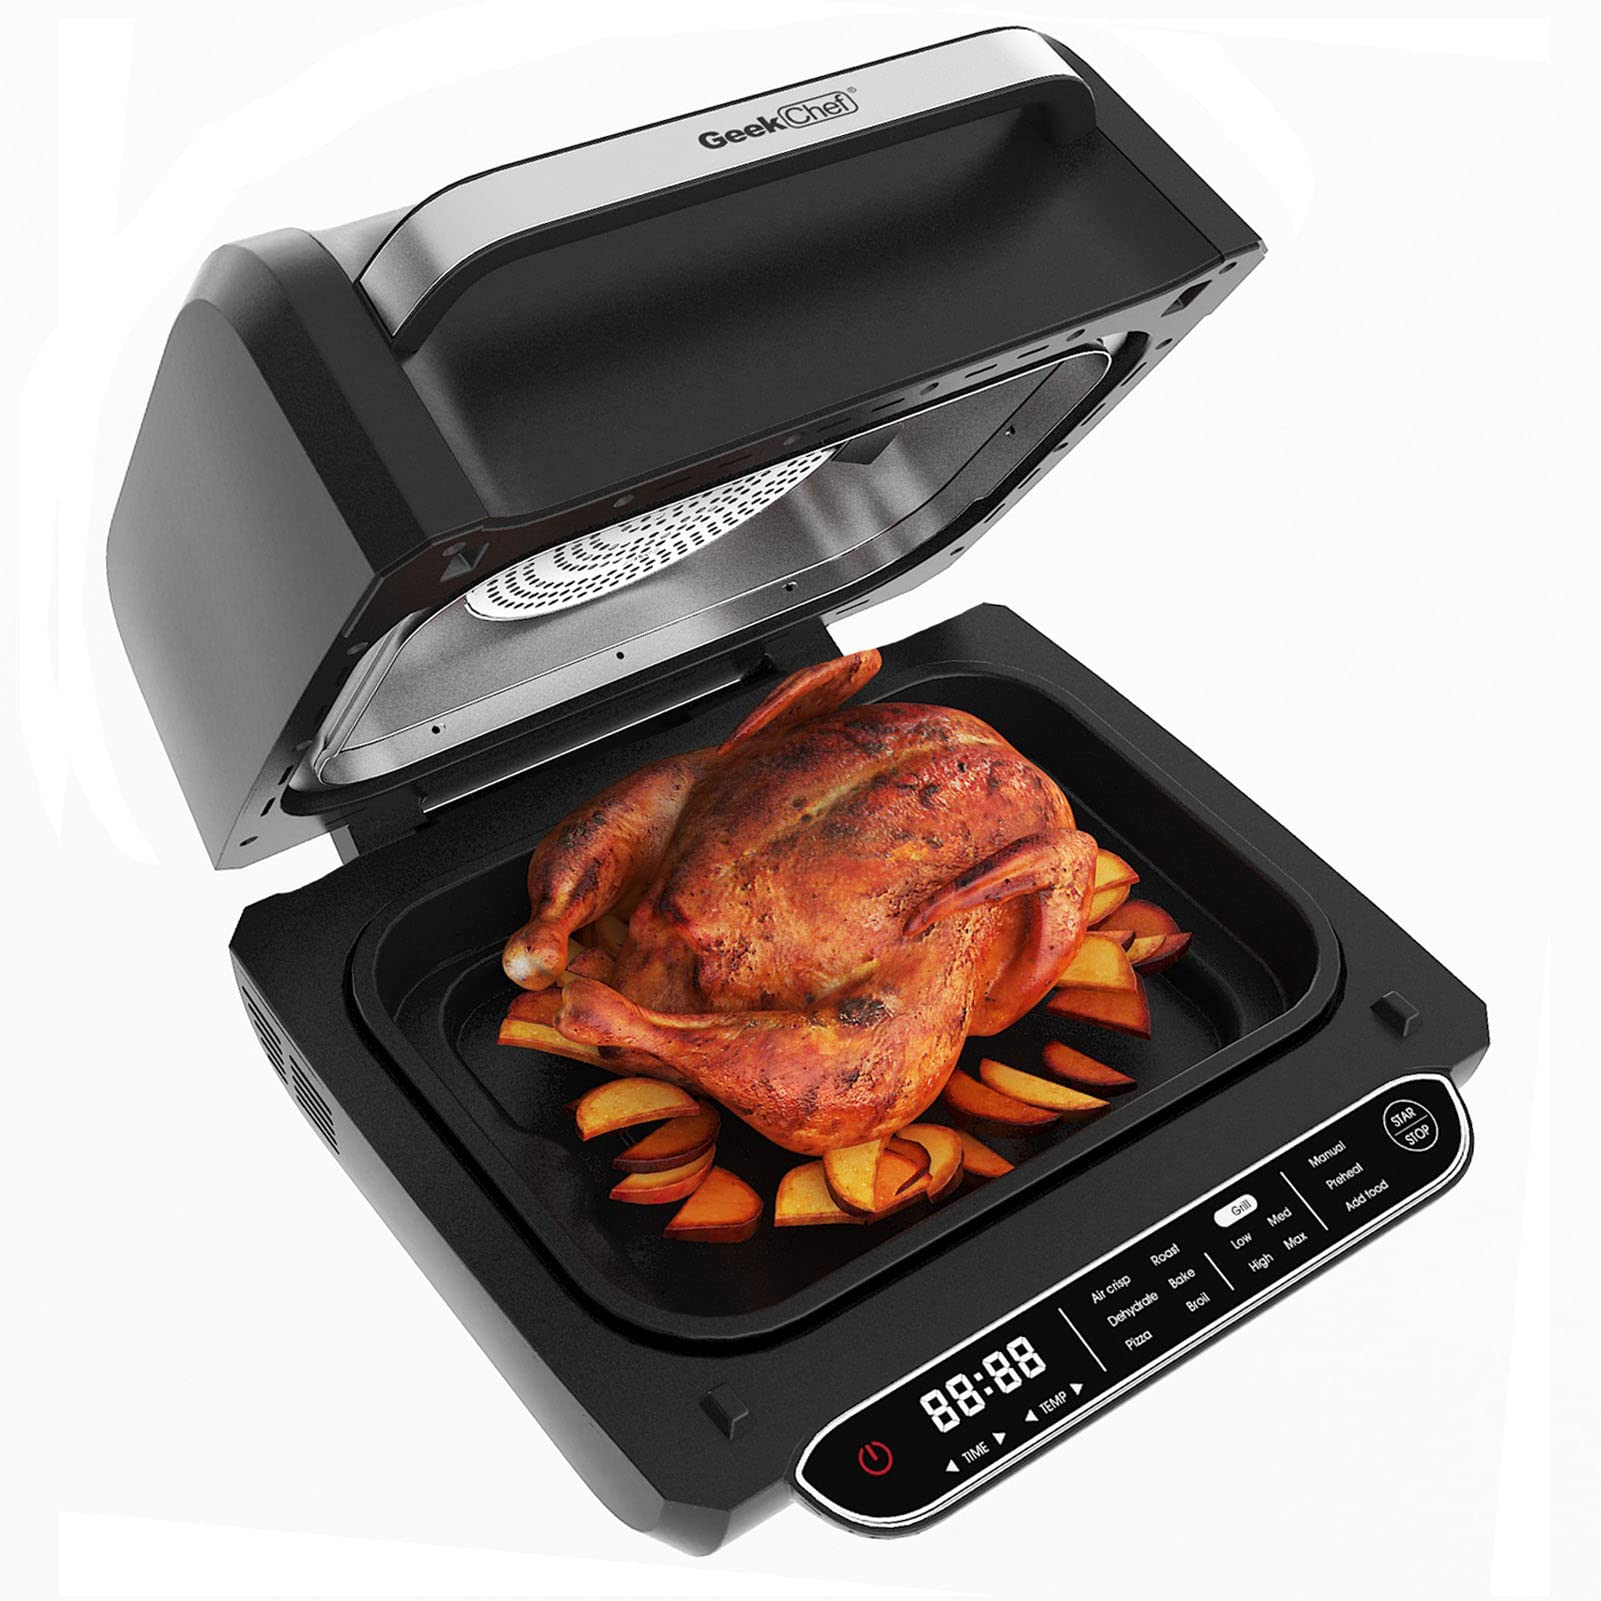 Bed Bath And Beyond Air Fryer: The Ultimate Guide to Delicious and Healthy Air Frying